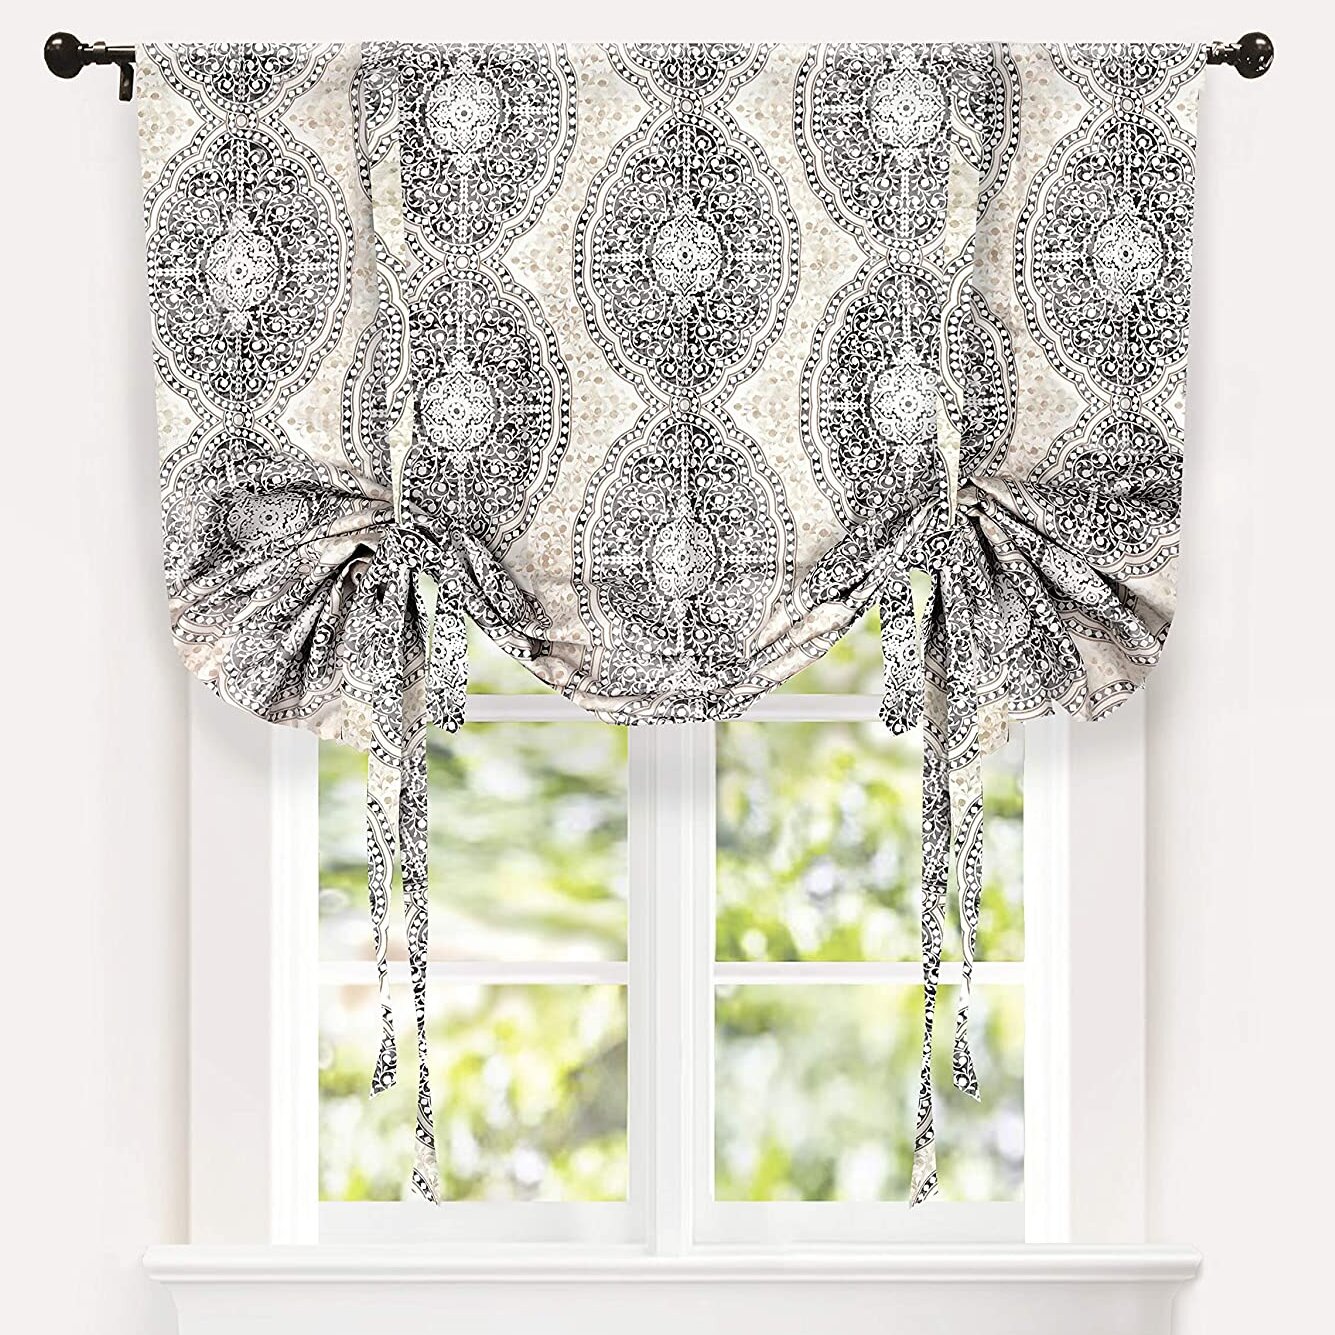 Exquisite Rural Style Floral Print Rod Pocket Sheer Curtain Pabel Voile Valance 